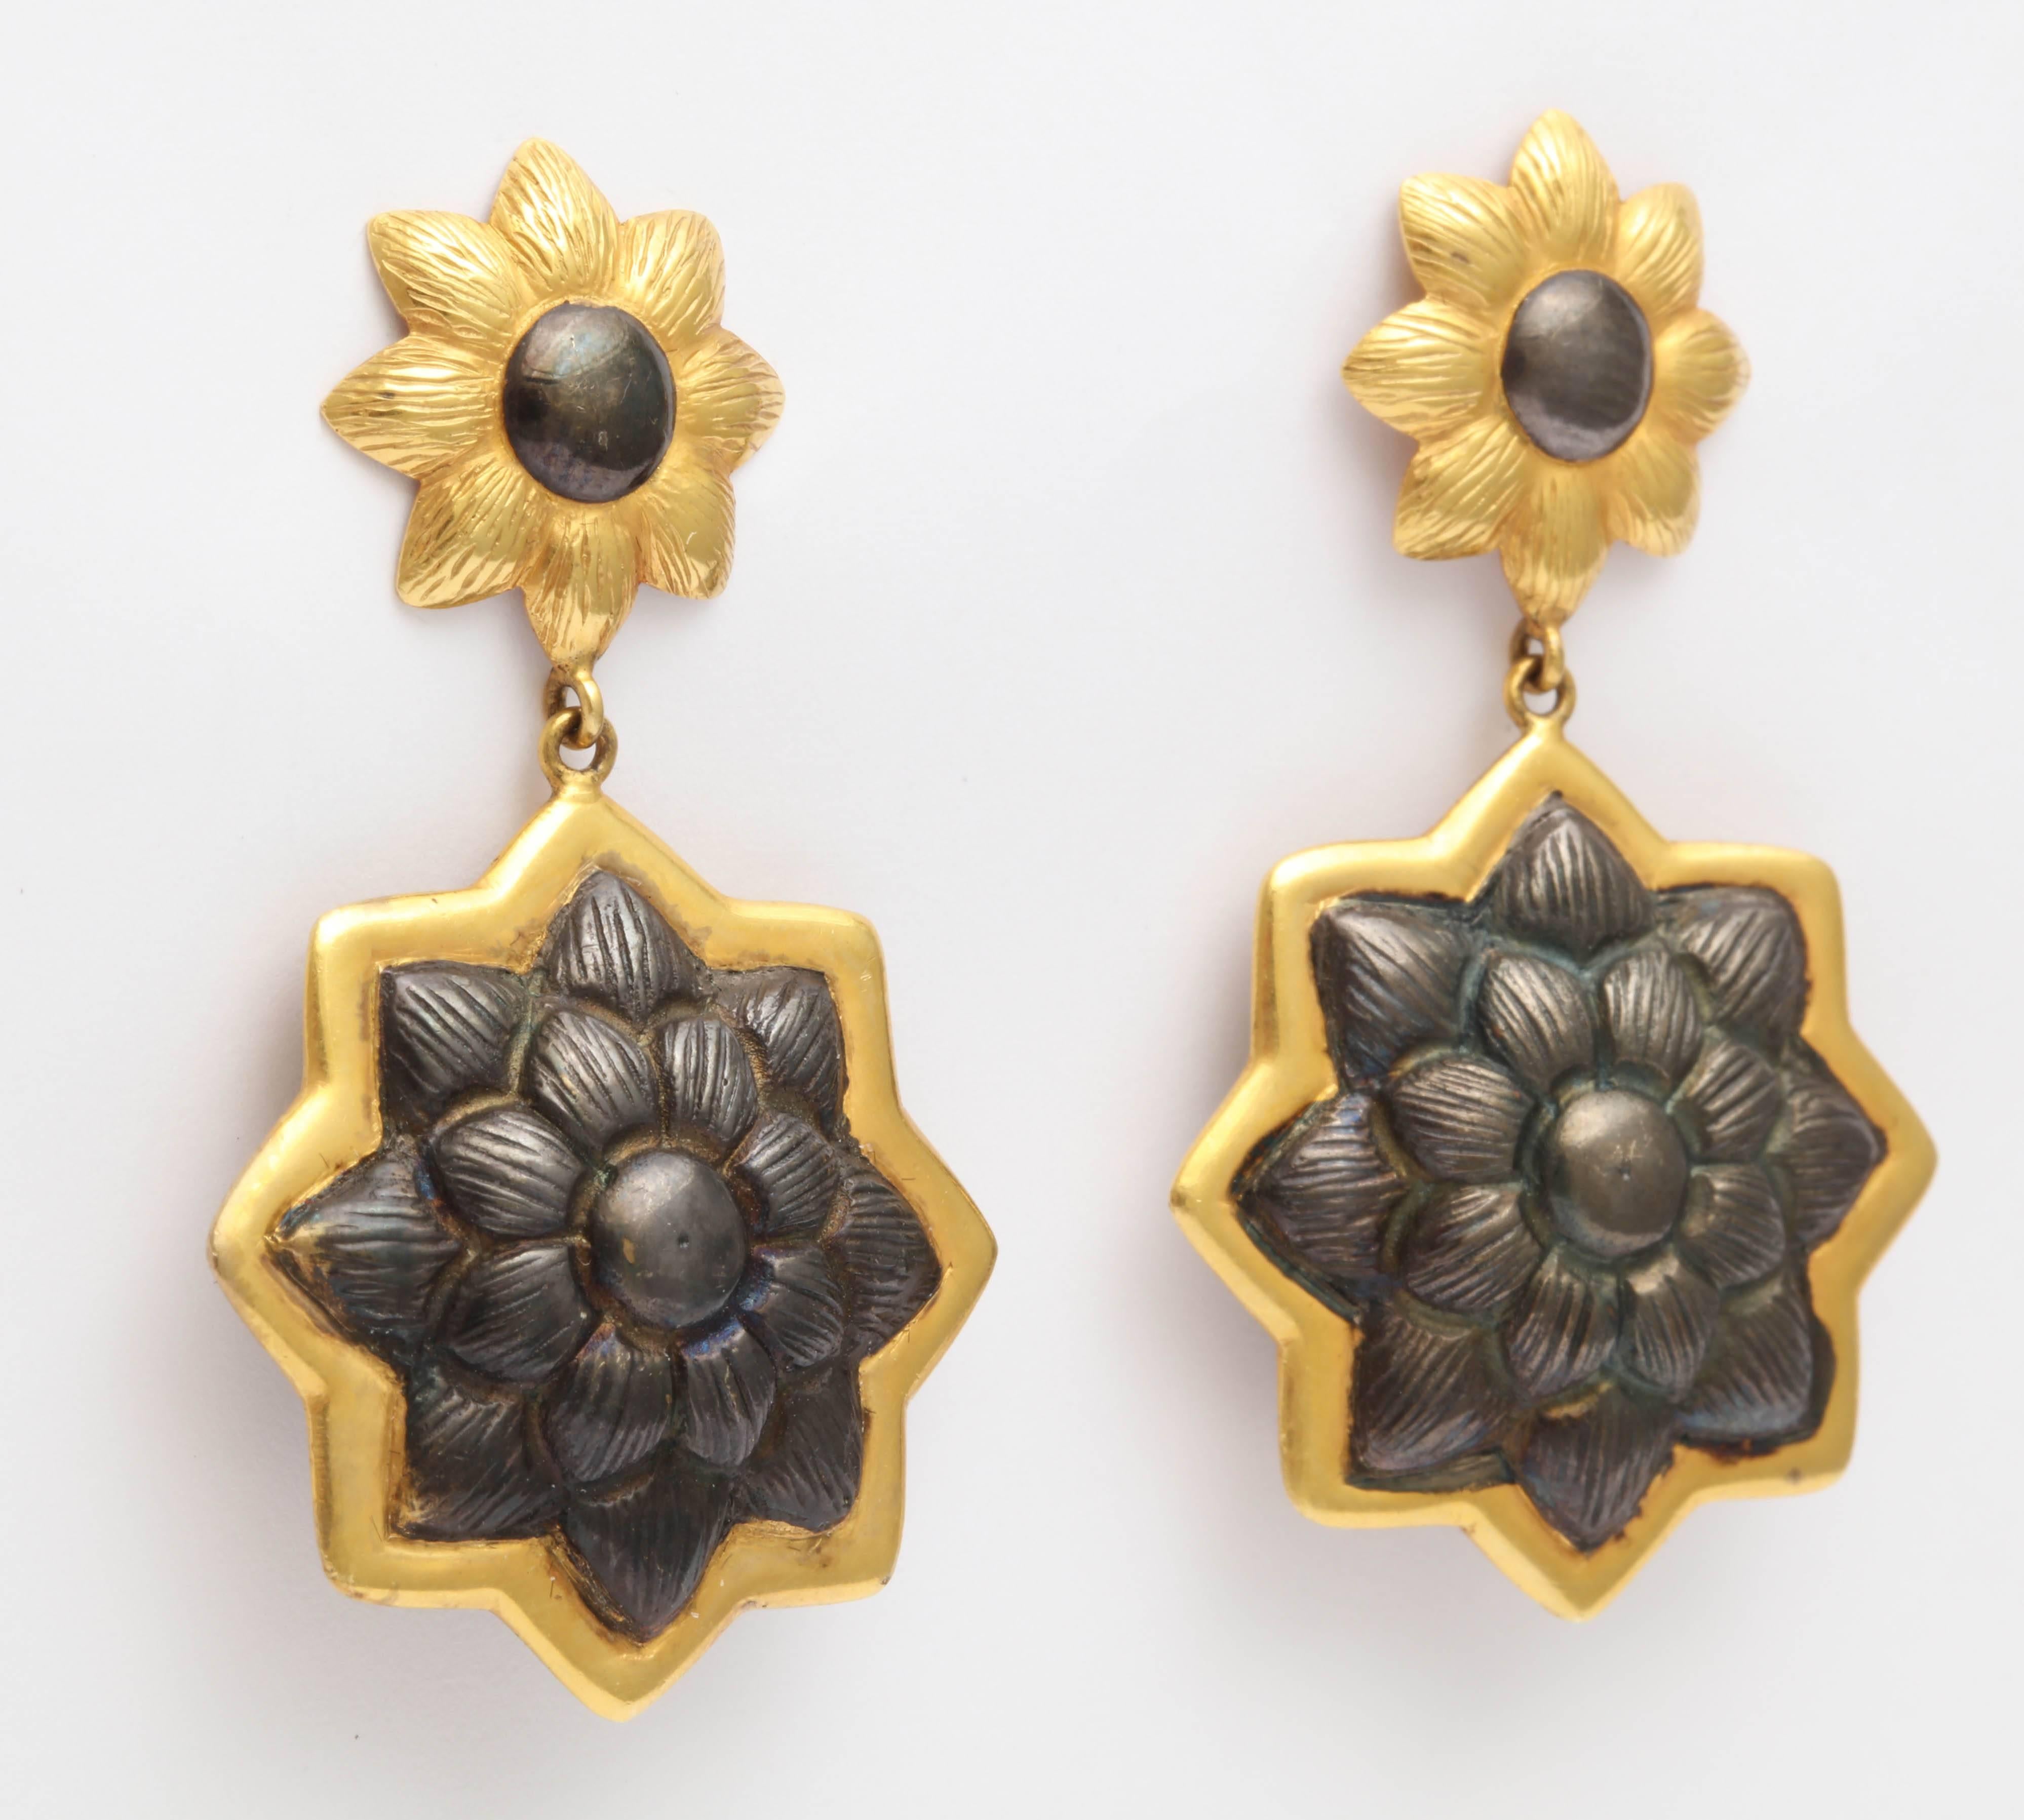 Fabulous Earrings with Indian Floral elements in Silver bordered by 18kt Yellow Gold Borders.  Strong and very basic. Tops reverse metals of bottom Sunflower elements.   Pierced tops.  